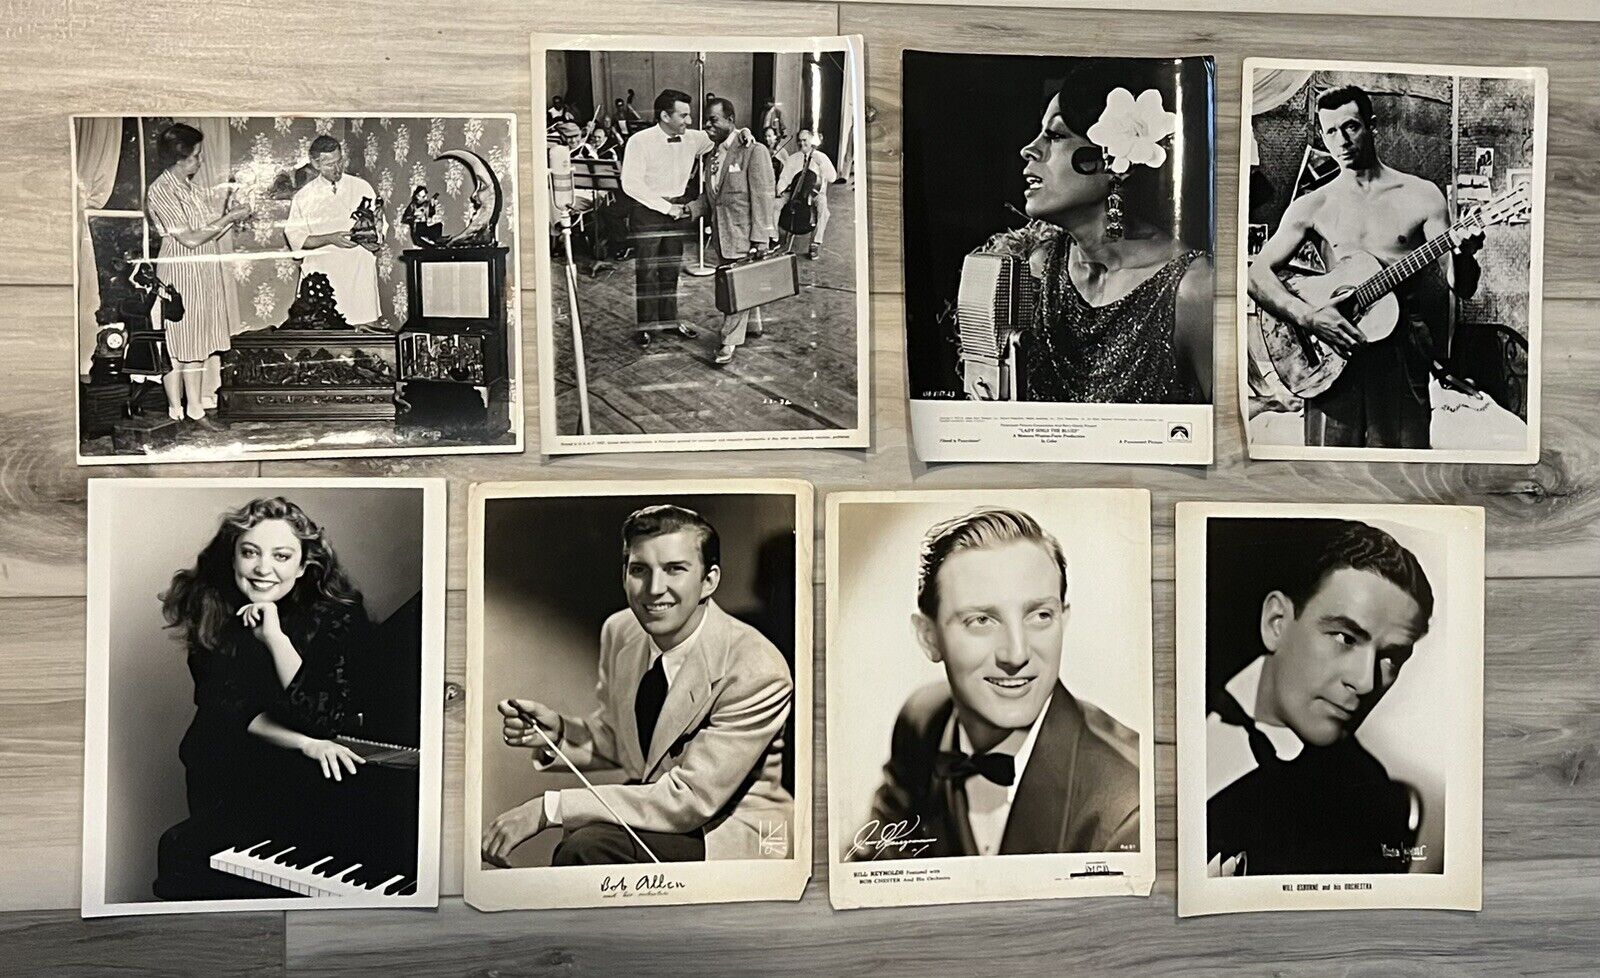 Big Band Press Photo Collection Louis Armstrong, Diana Ross, Bob Allen And More